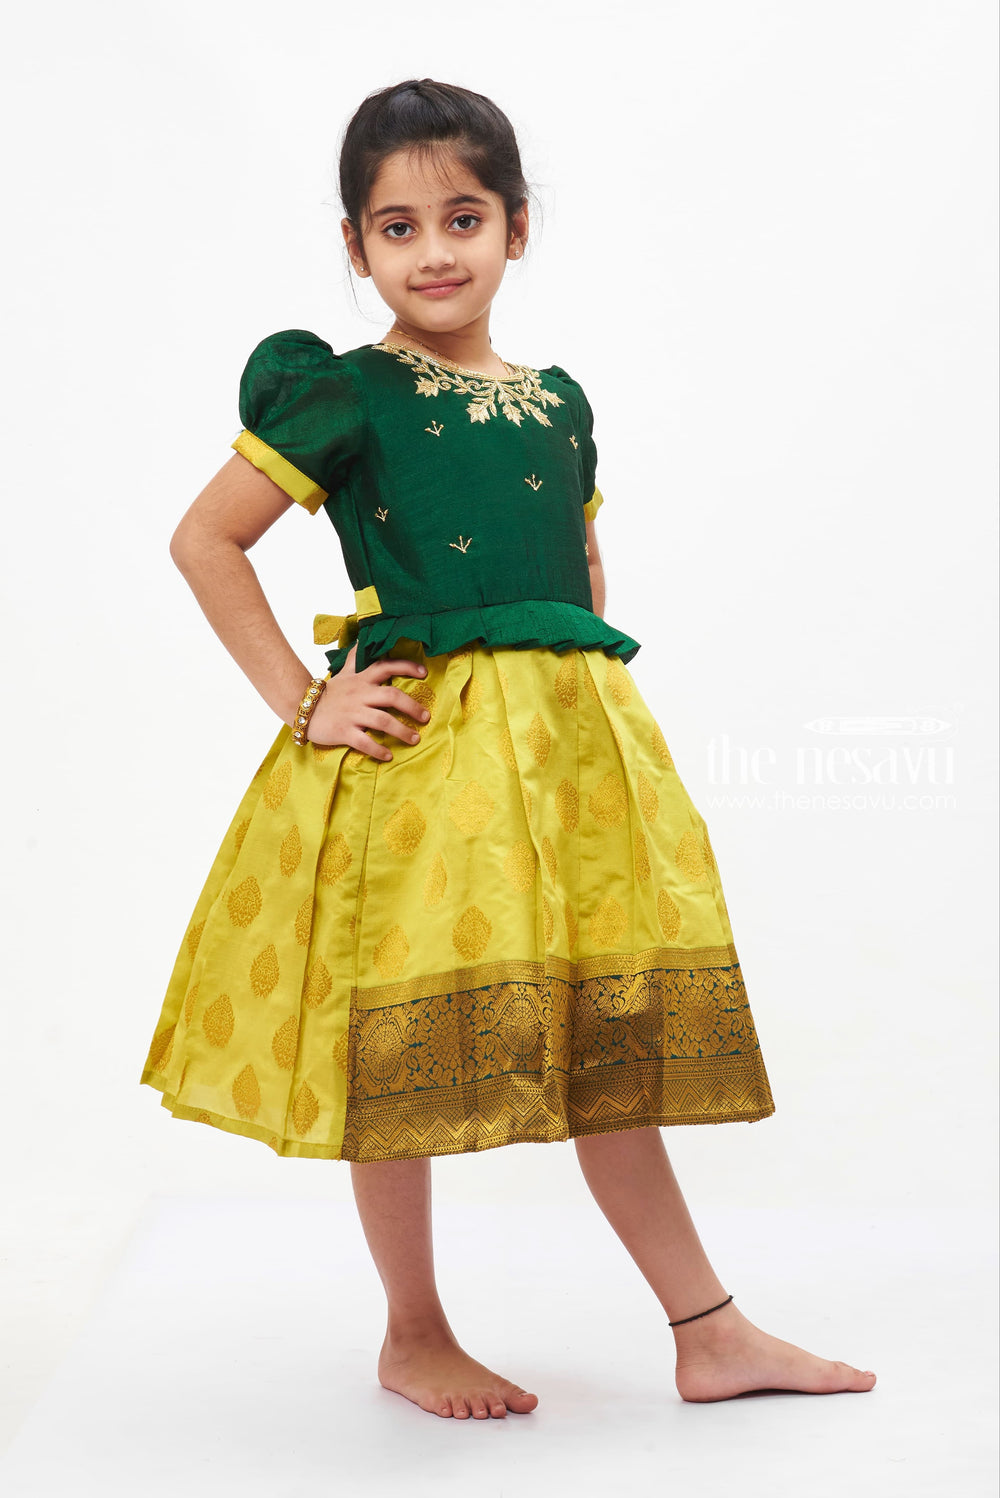 The Nesavu Silk Embroidered Frock Traditional Silk Frock for Girls - Emerald Green with Golden Zari Embroidery Nesavu Girls Emerald Green Silk Frock | Golden Zari Embroidery | The Nesavu